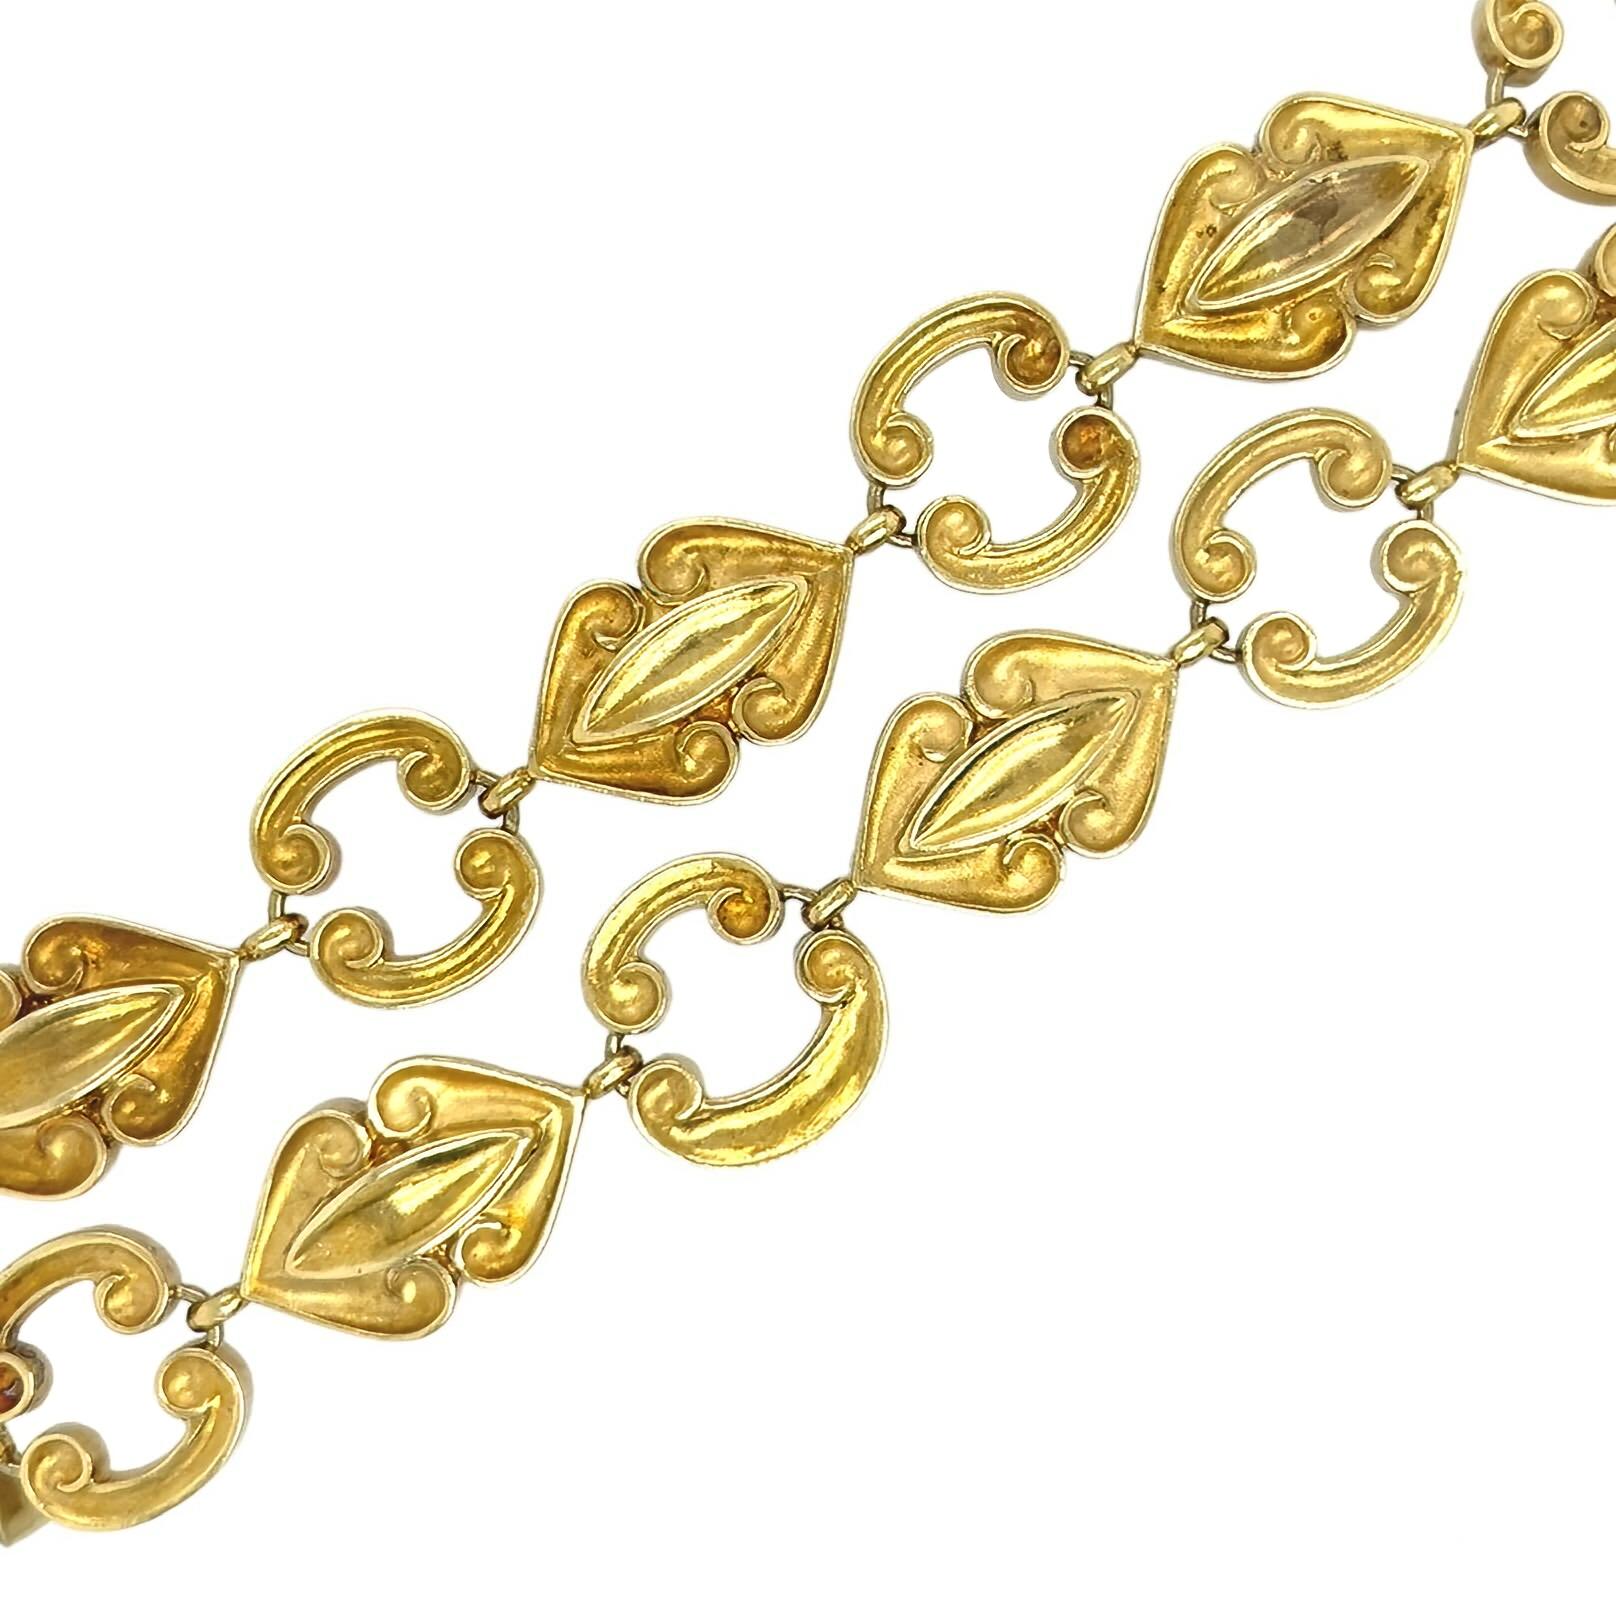 An 18 karat yellow gold necklace. Wander. French. Circa 1960. Designed as alternating polished and matte gold scrolling and navette shaped links, length is approximately 28 3/4 inches, divides into two necklaces measuring approximately 15 1/4 inches